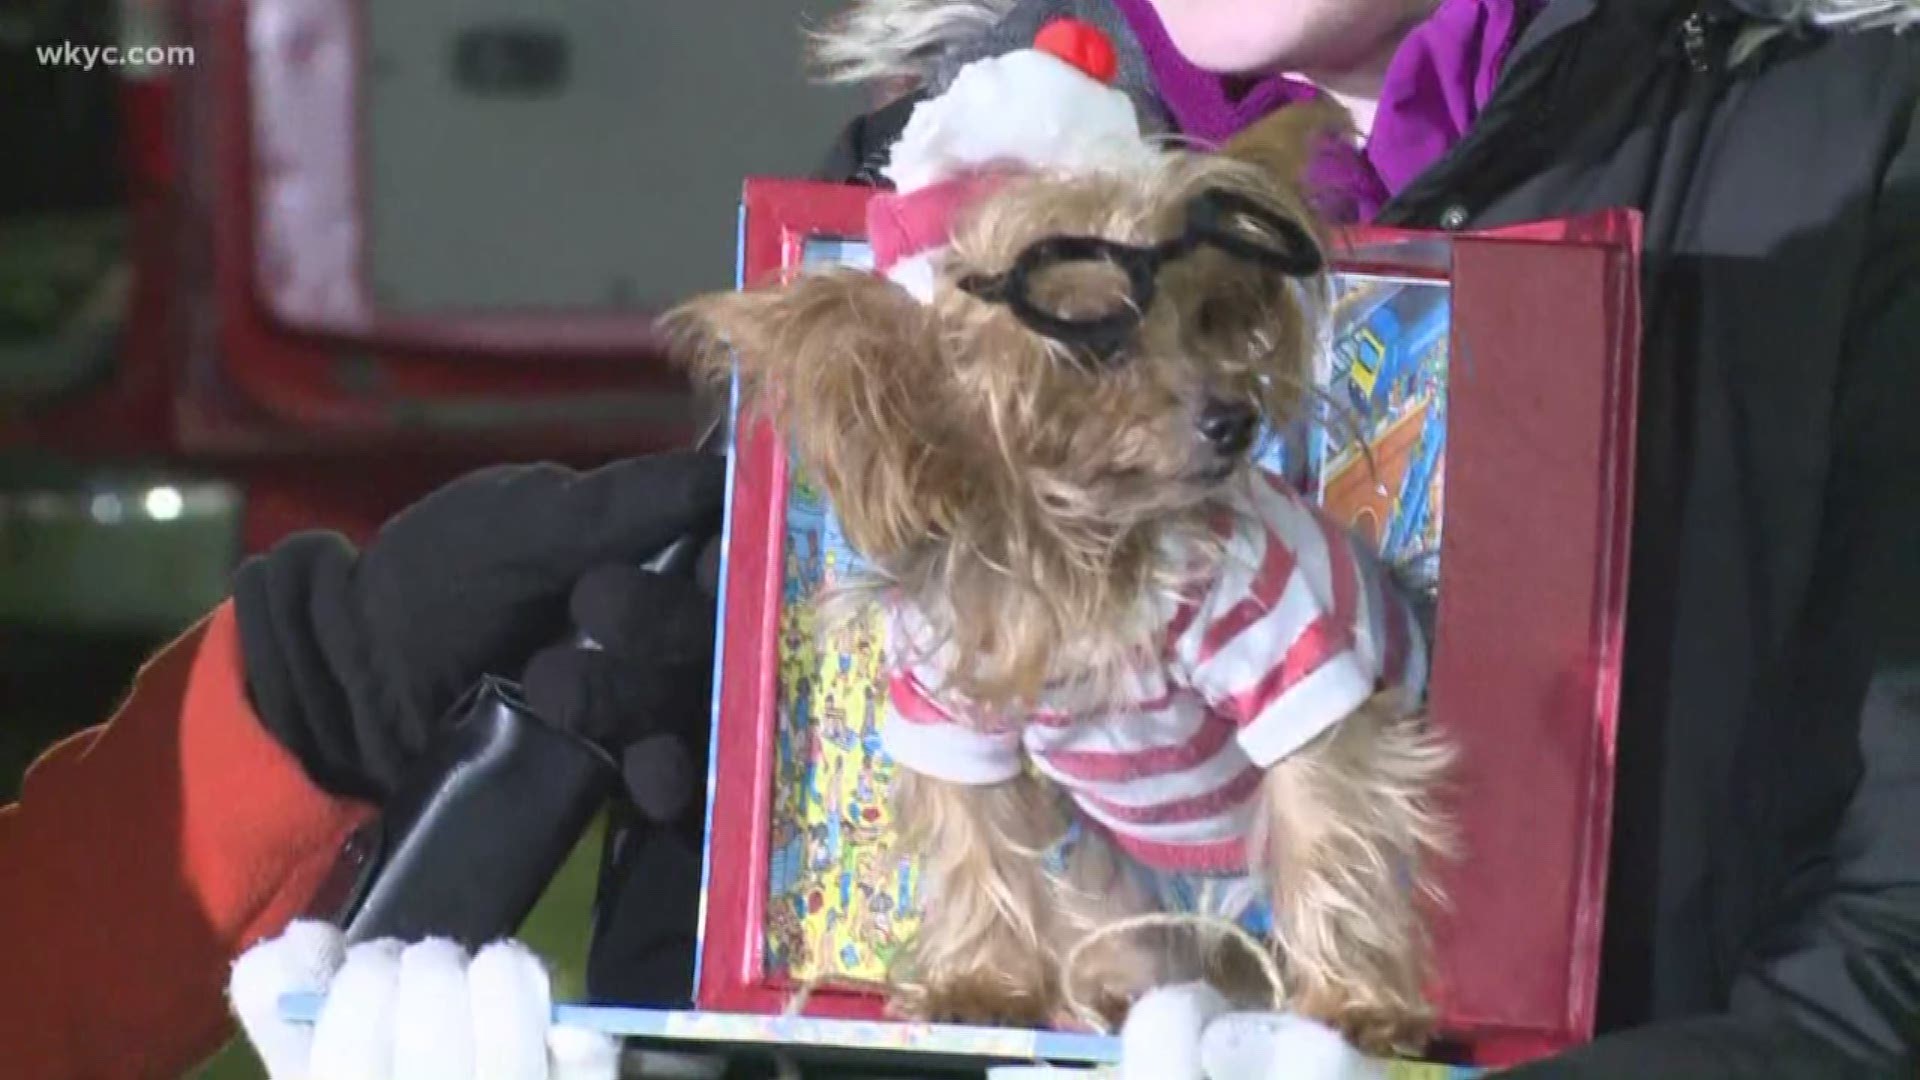 Oct. 18, 2018: Look how cute this pup is! It's dressed as 'Where's Waldo' for Lakewood's annual Spooky Pooch Parade.